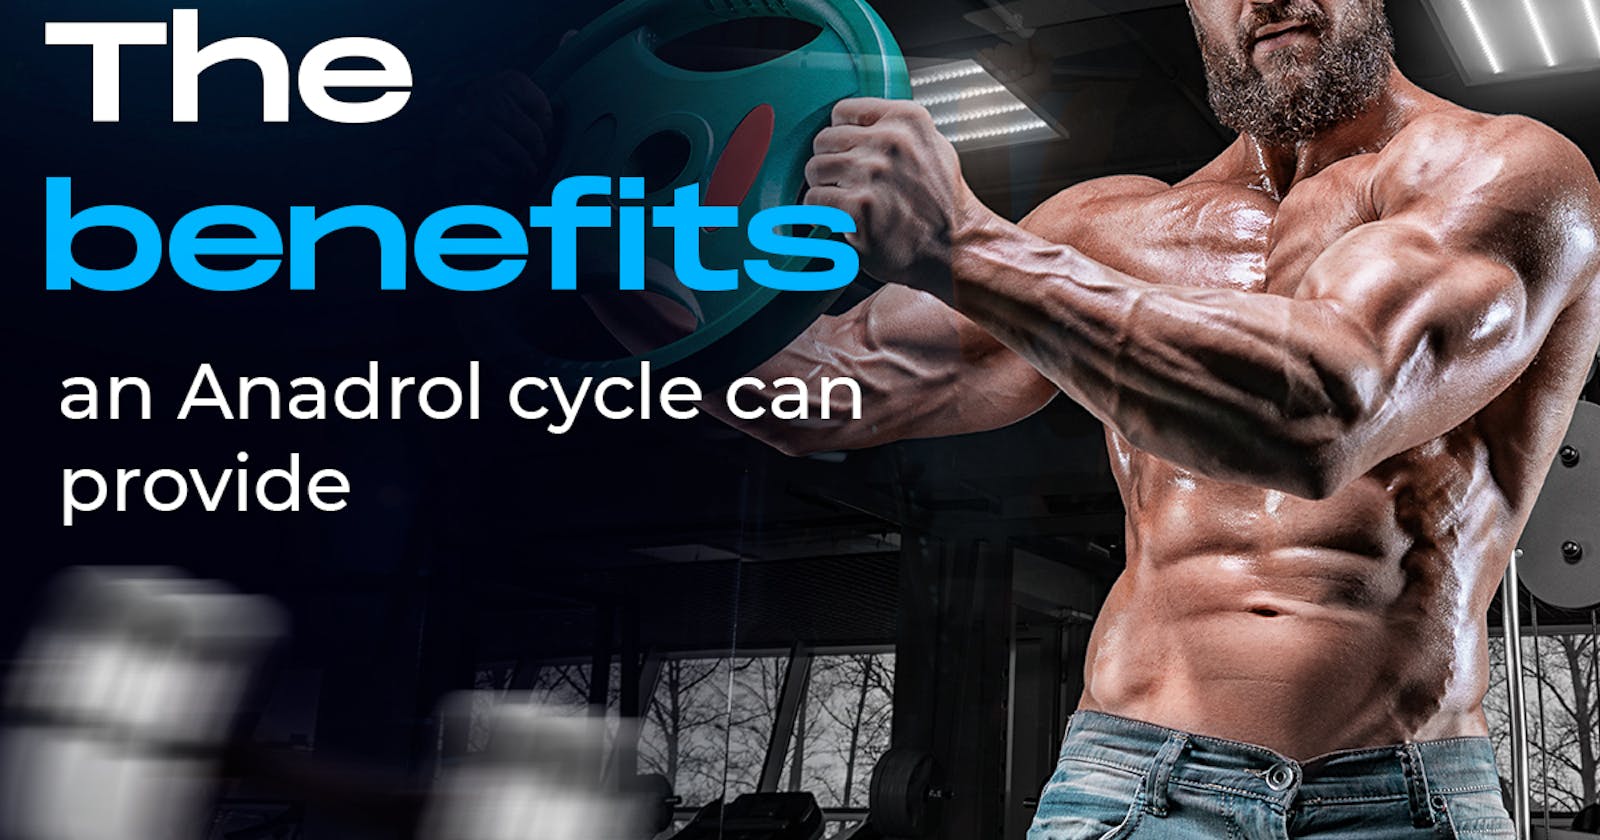 Anadrol Oxymetholone Steroid - Benefits, Cycle, Side Effects, Before & After Results?